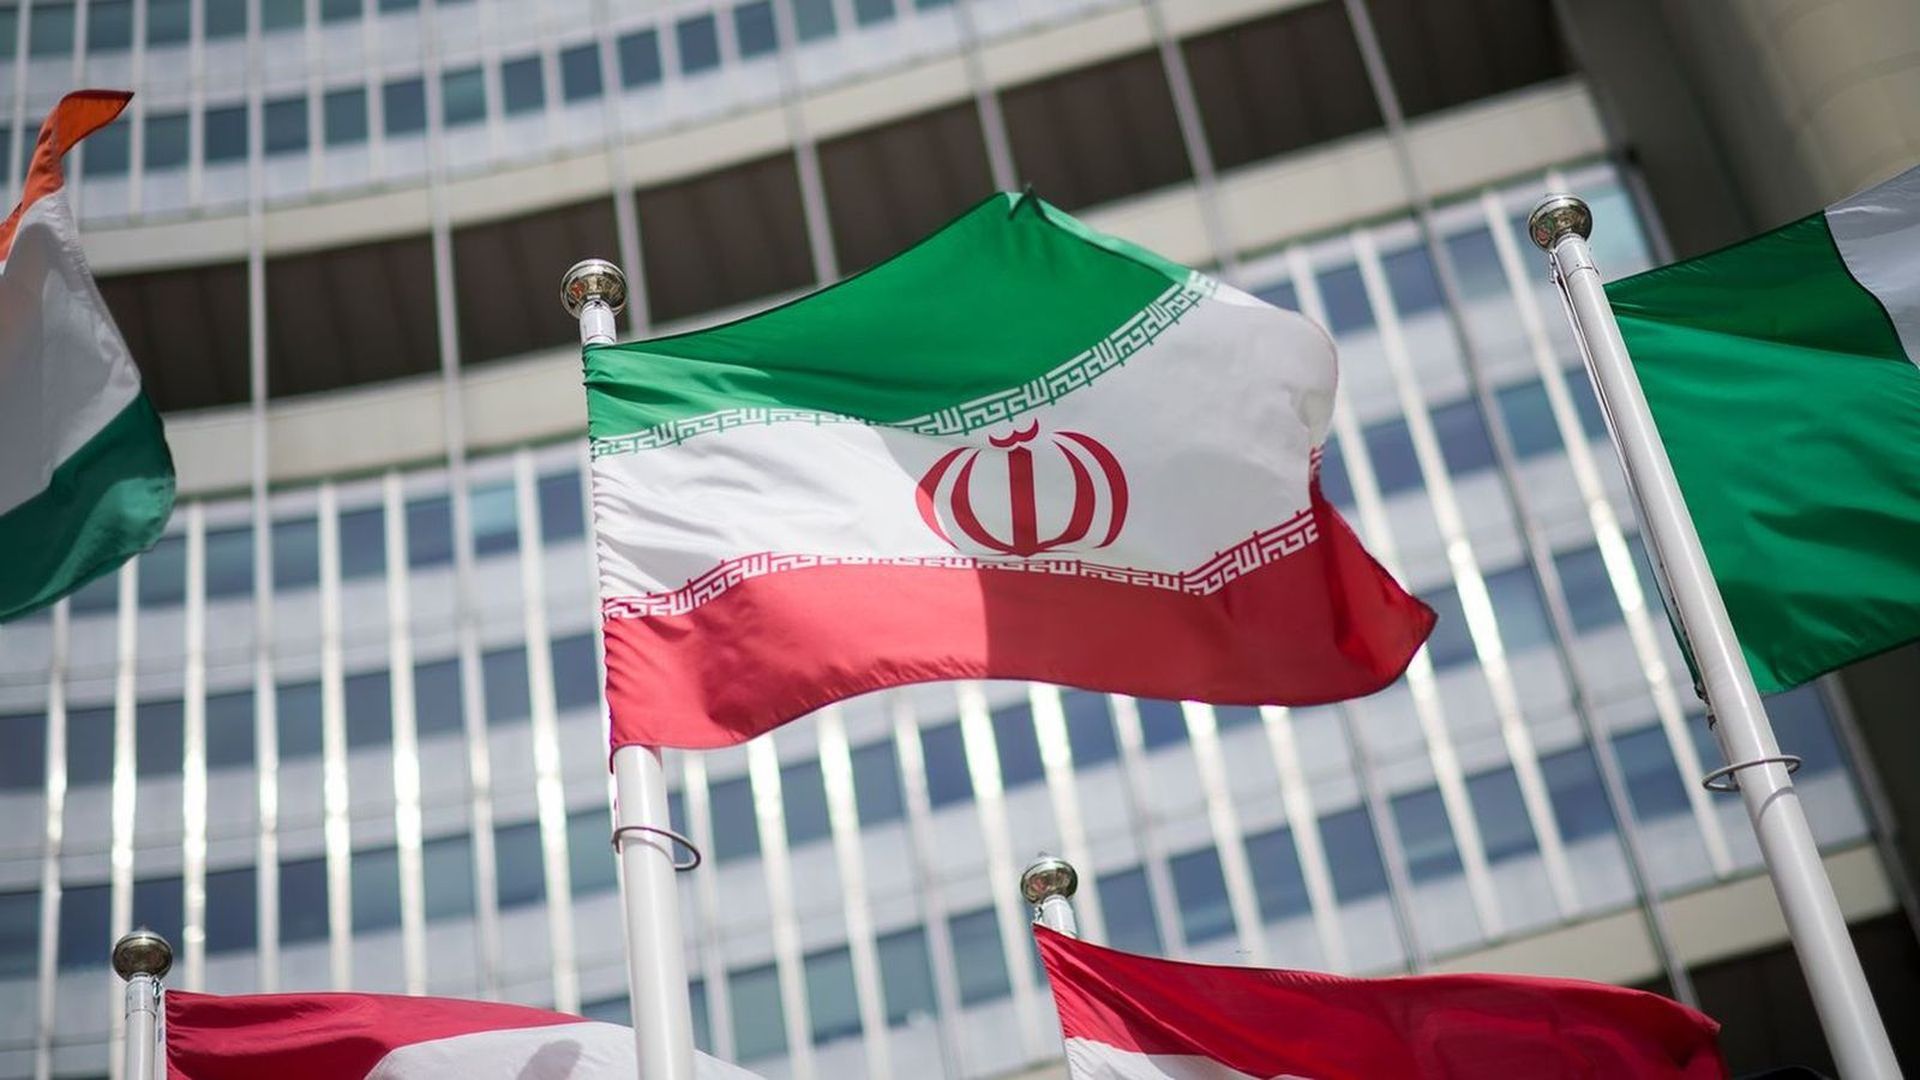 The flag of Iran is seen in front of the International Atomic Energy Agency headquarters in Vienna. Photo: Michael Gruber/Getty Images